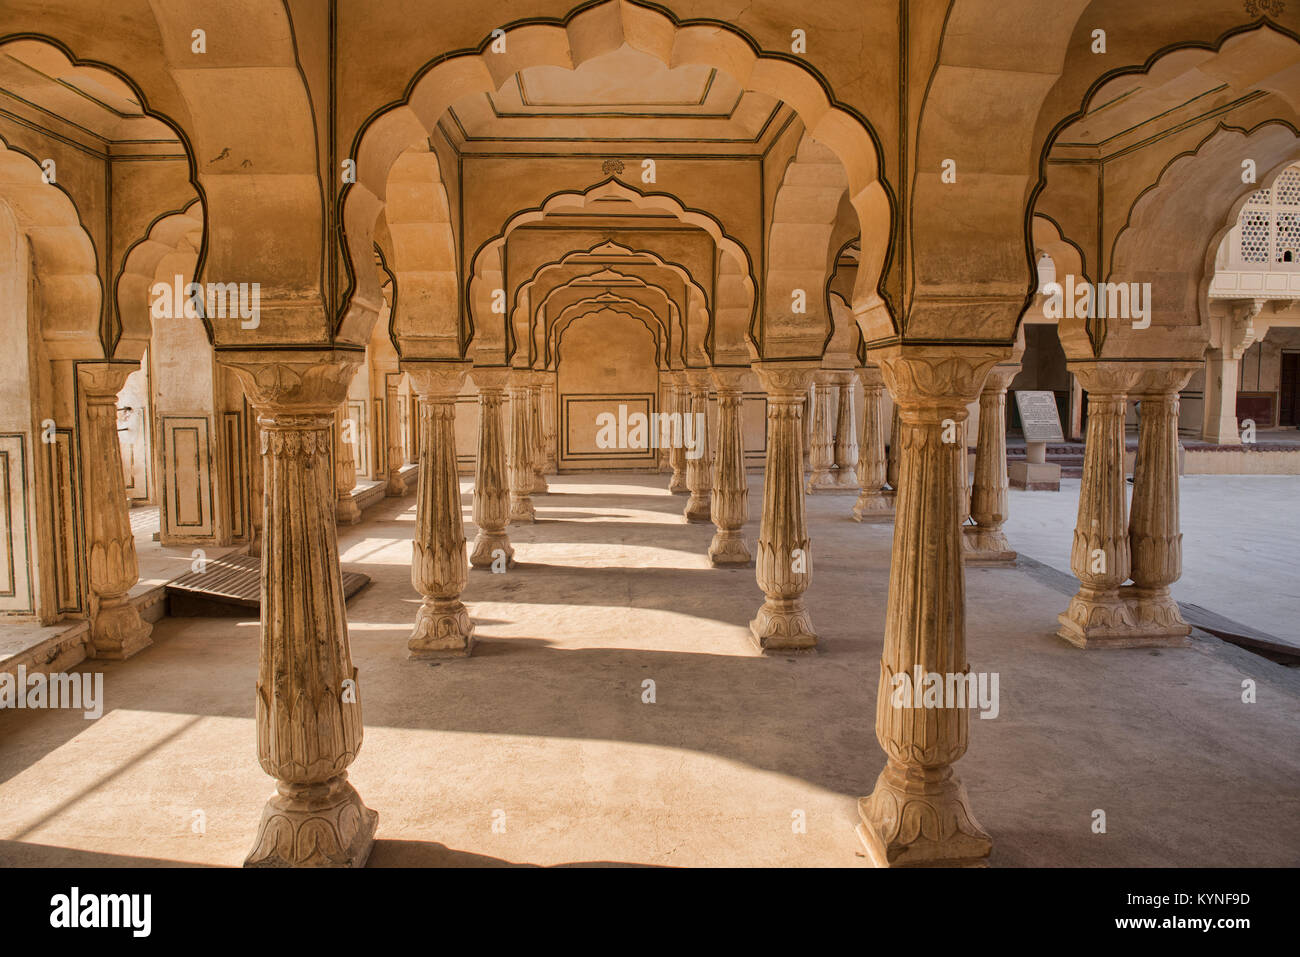 Arched pavilion at the Amer Fort, Jaipur, India Stock Photo